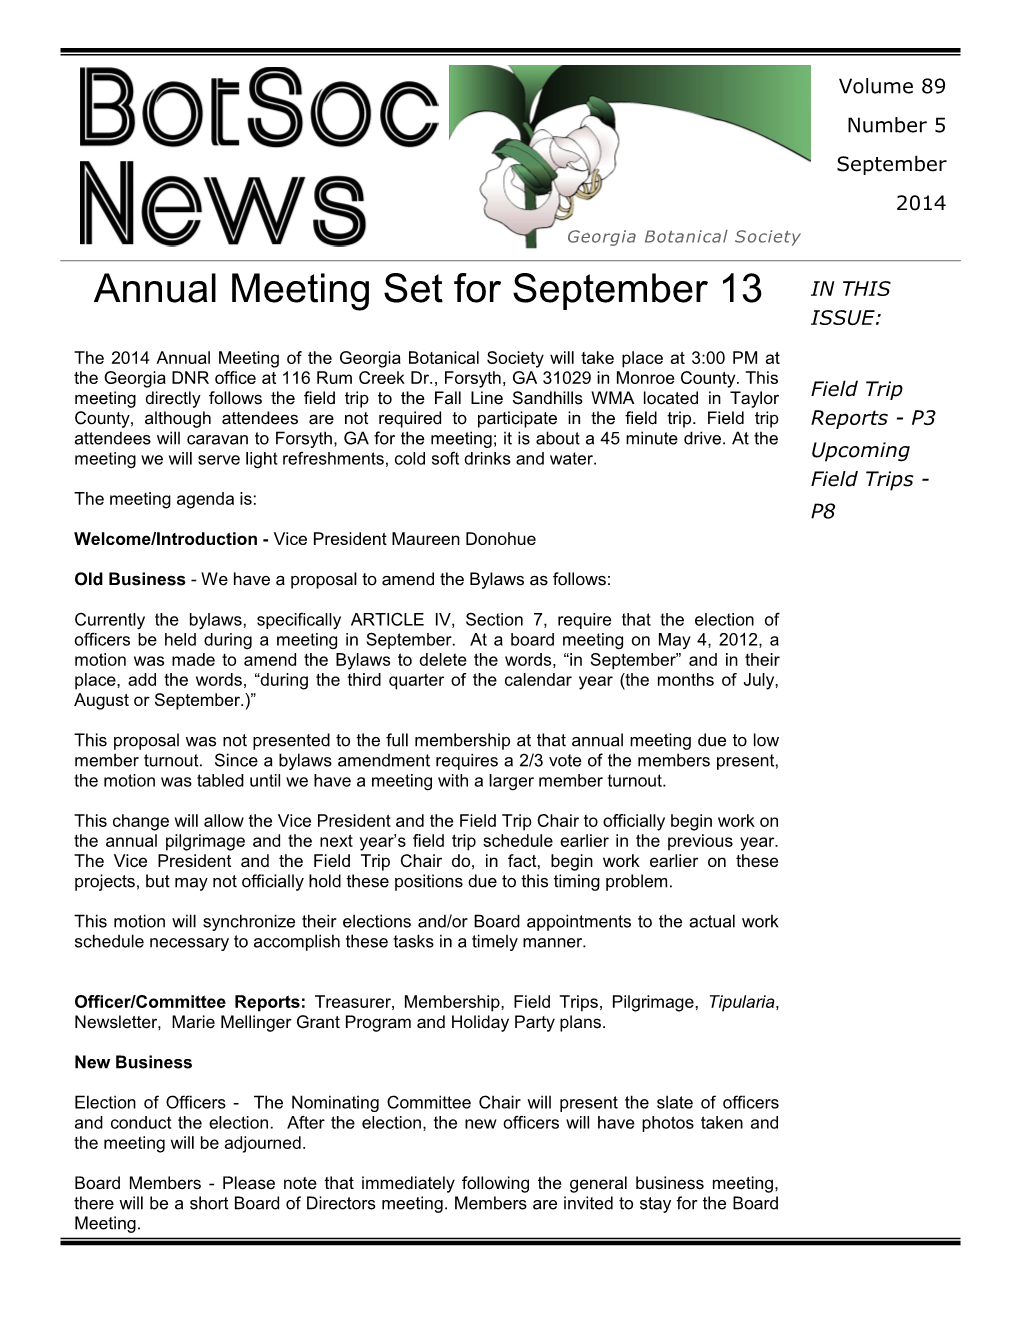 Annual Meeting Set for September 13 in THIS ISSUE